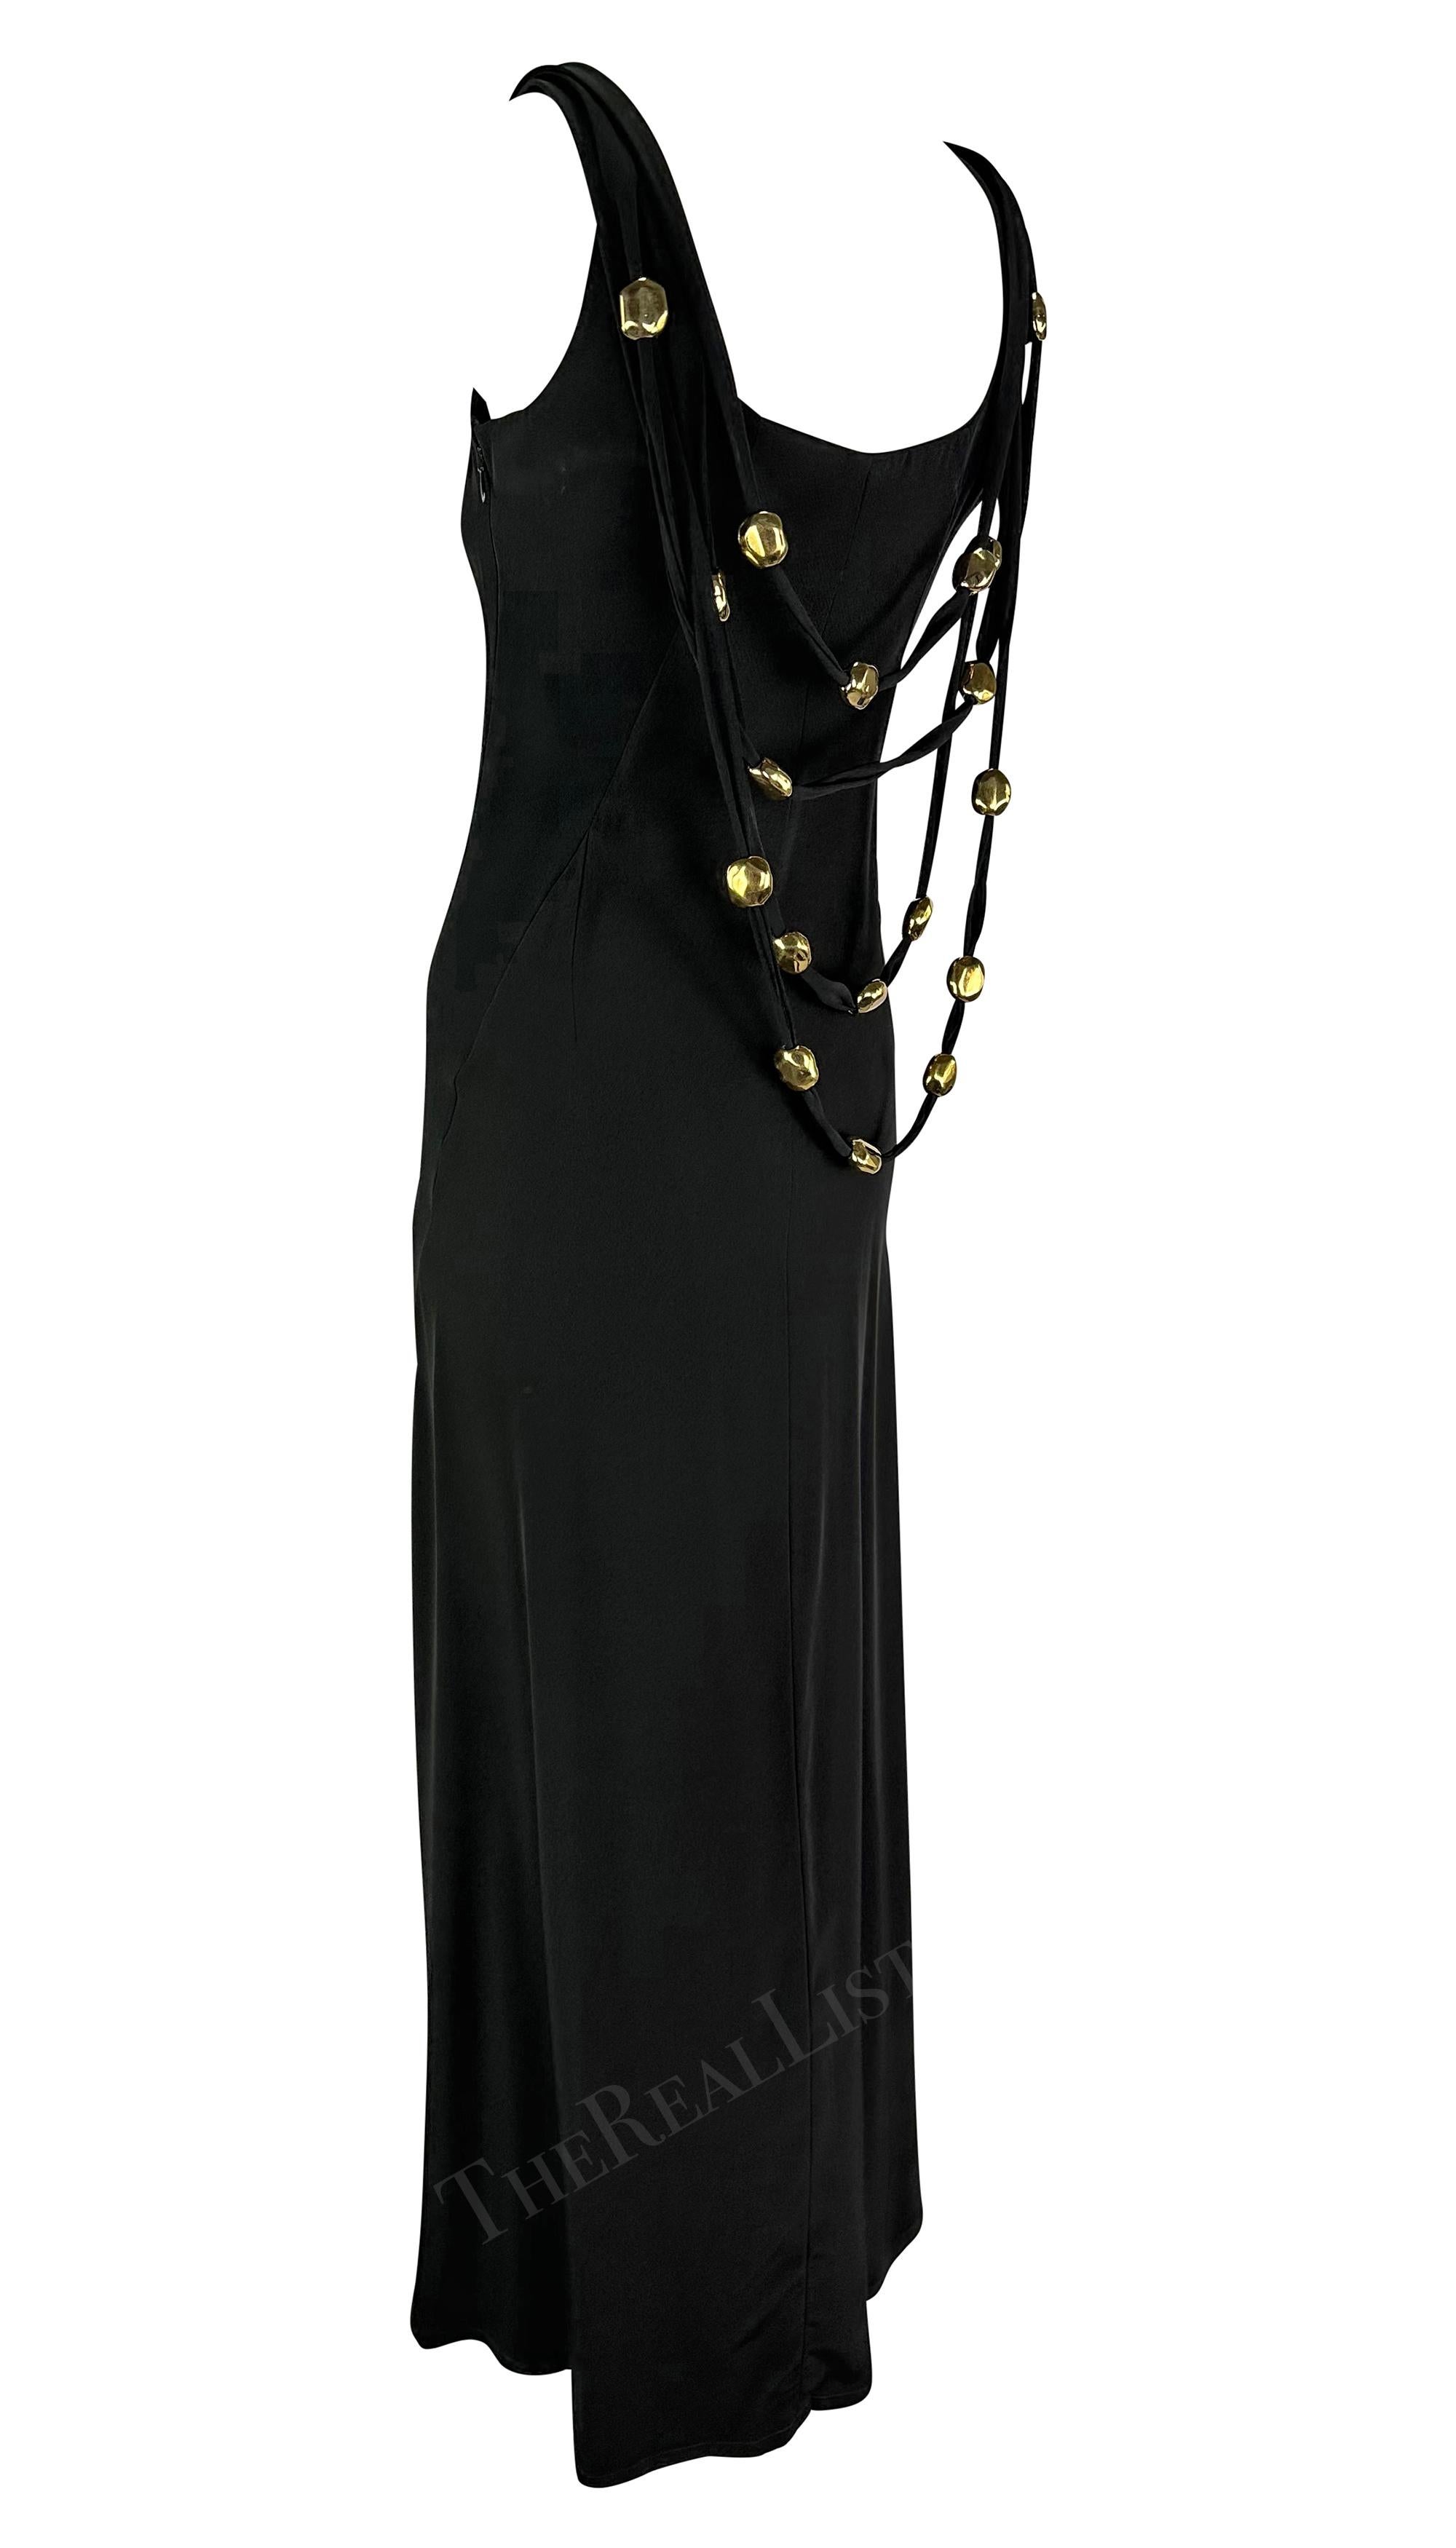 Women's S/S 1993 Christian Lacroix Runway Black Gold Sculptural Jewelry Bead Gown For Sale